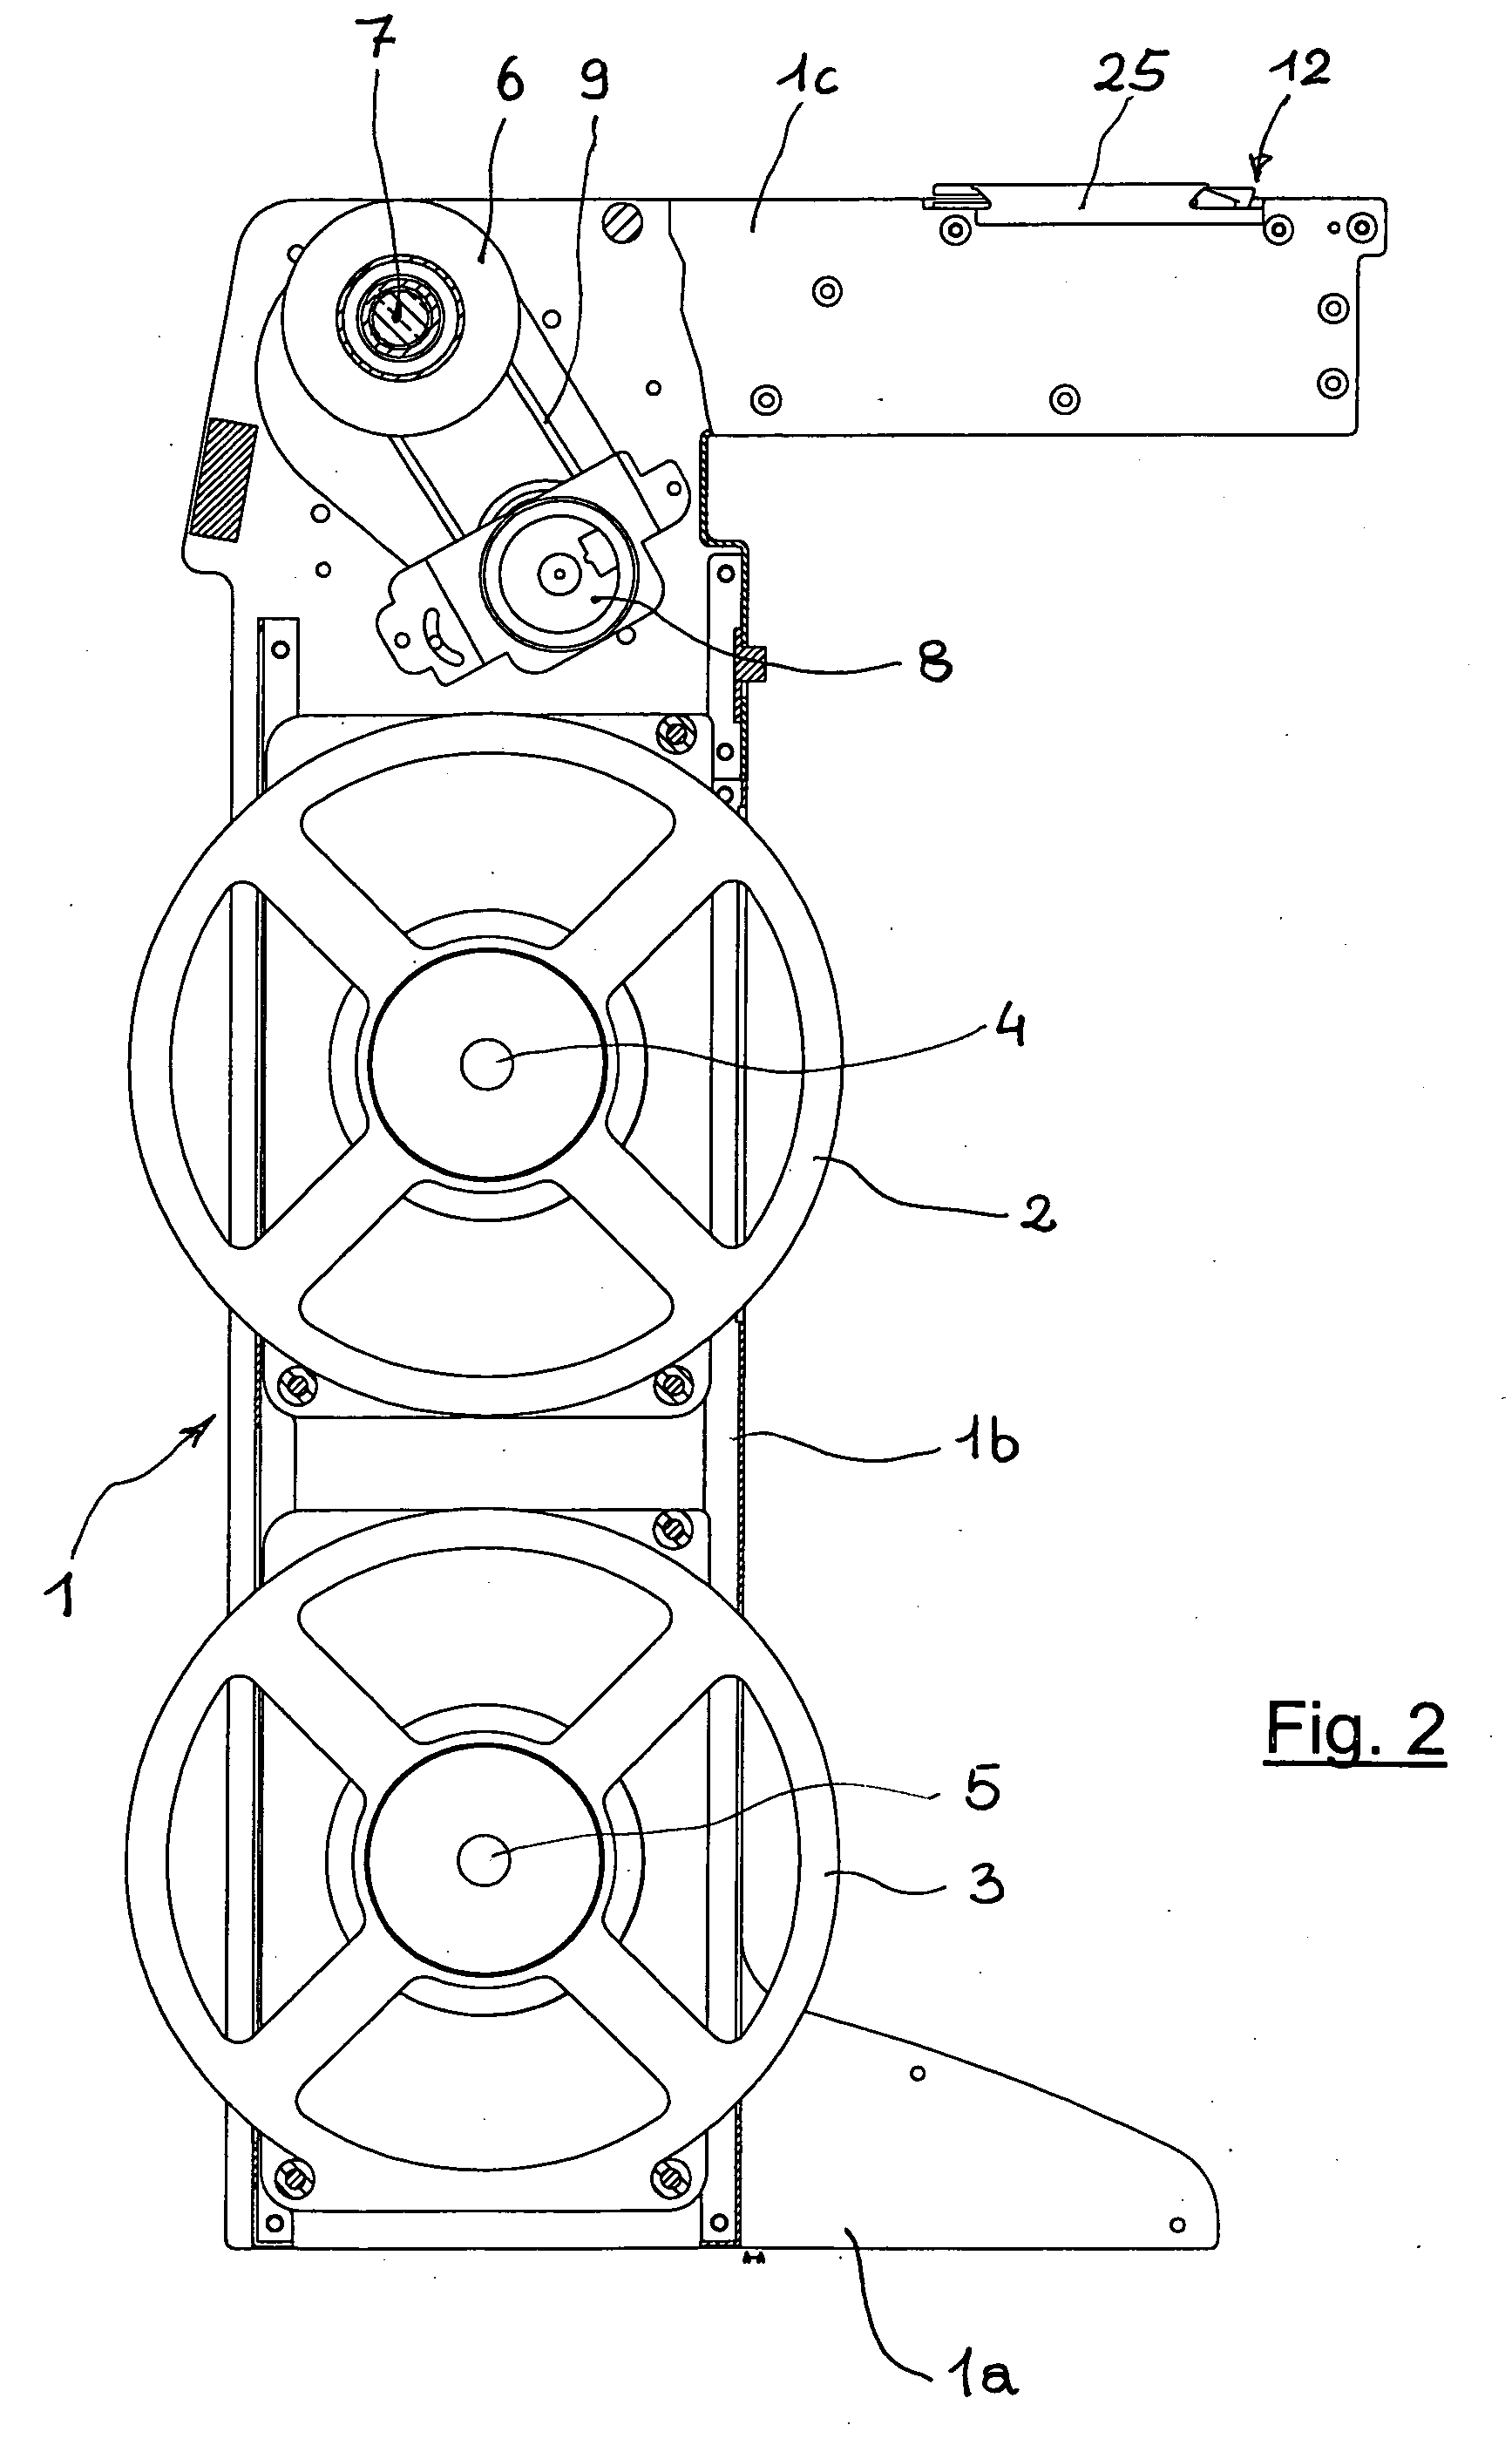 Linear multiple feeder for automatic surface-mounting device positioning apparatuses